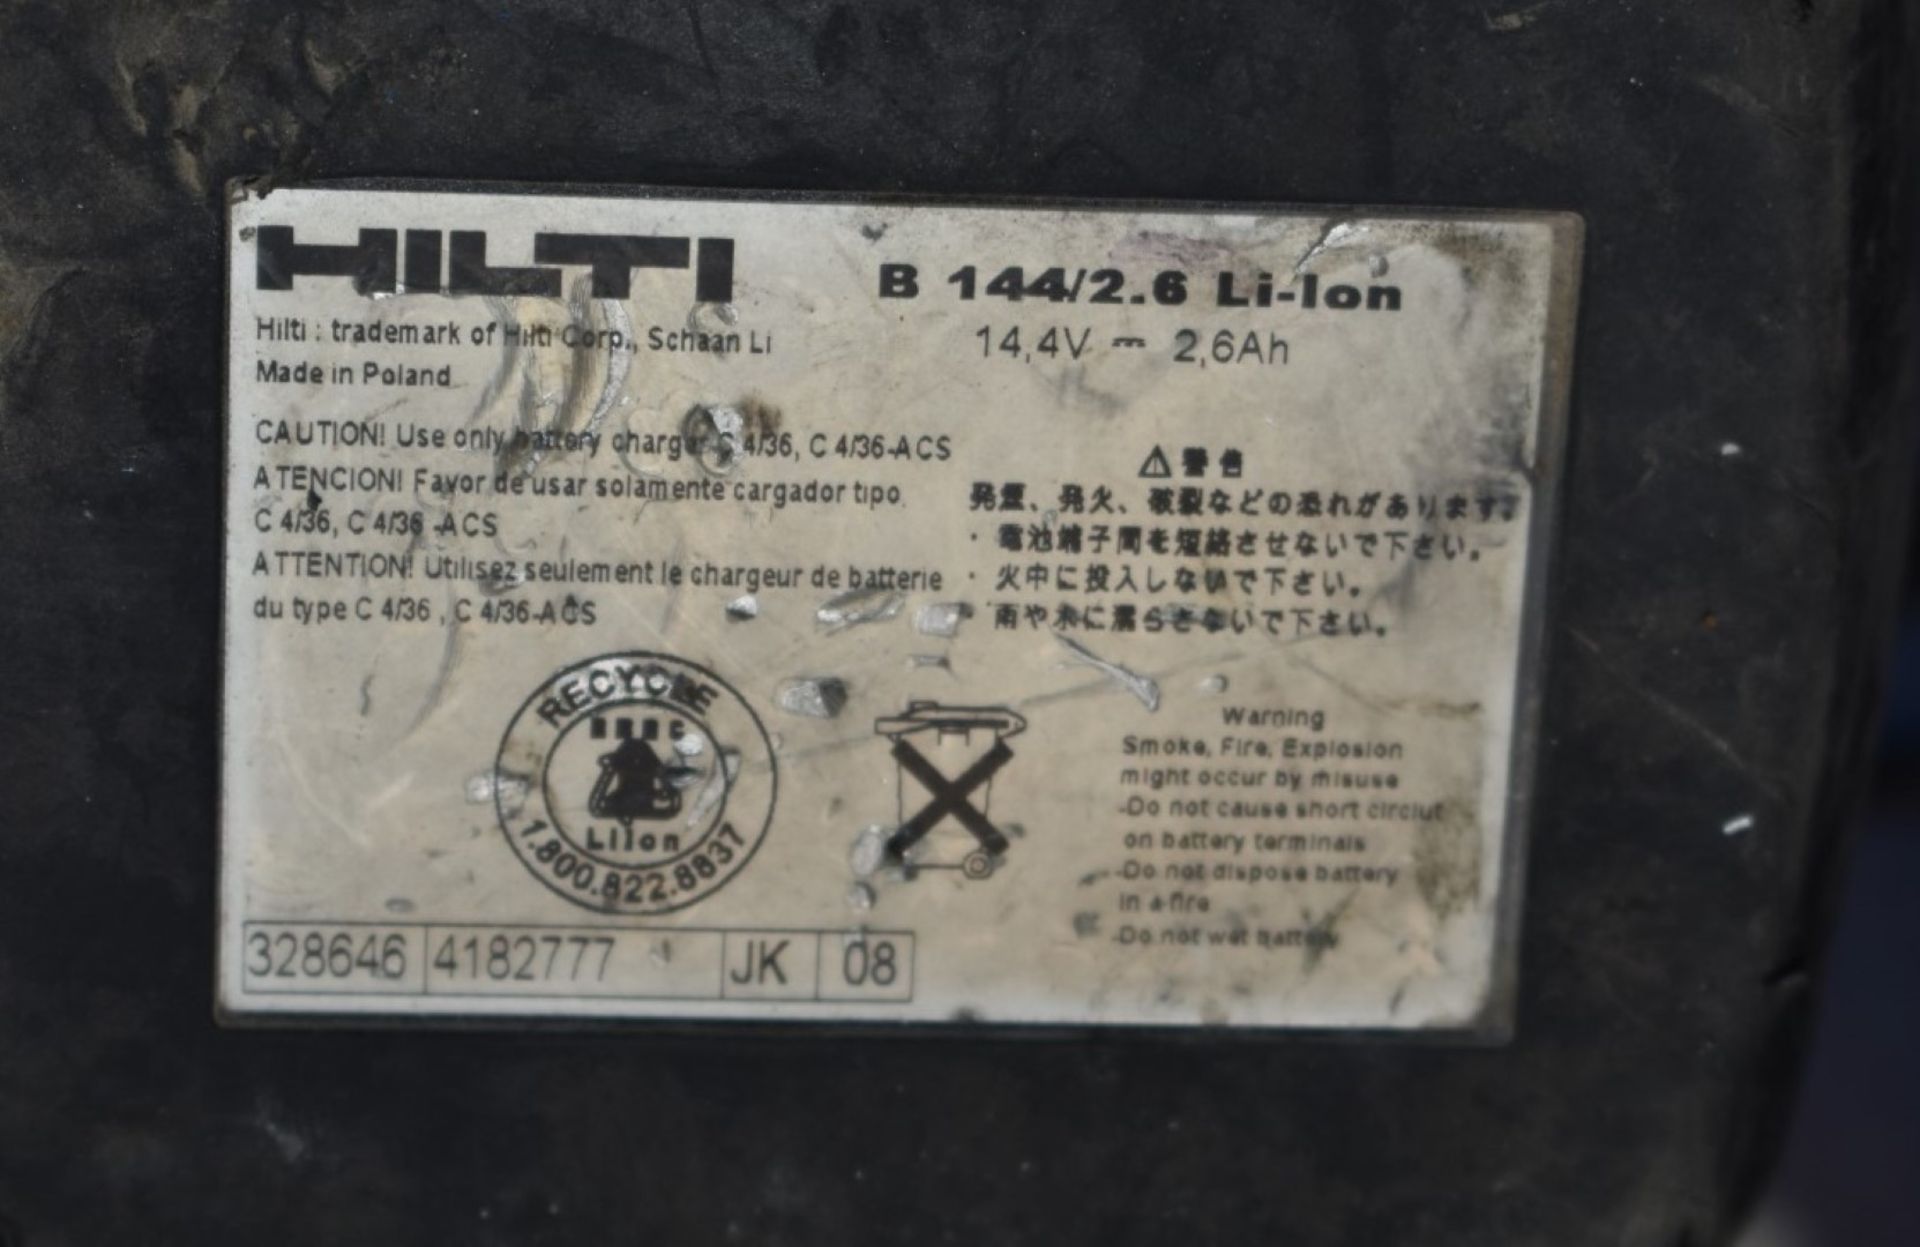 1 x Hilti Battery and Battery Charger Charger Type C 4/36ACS and Battery Type 328646 14.4v - Image 2 of 8